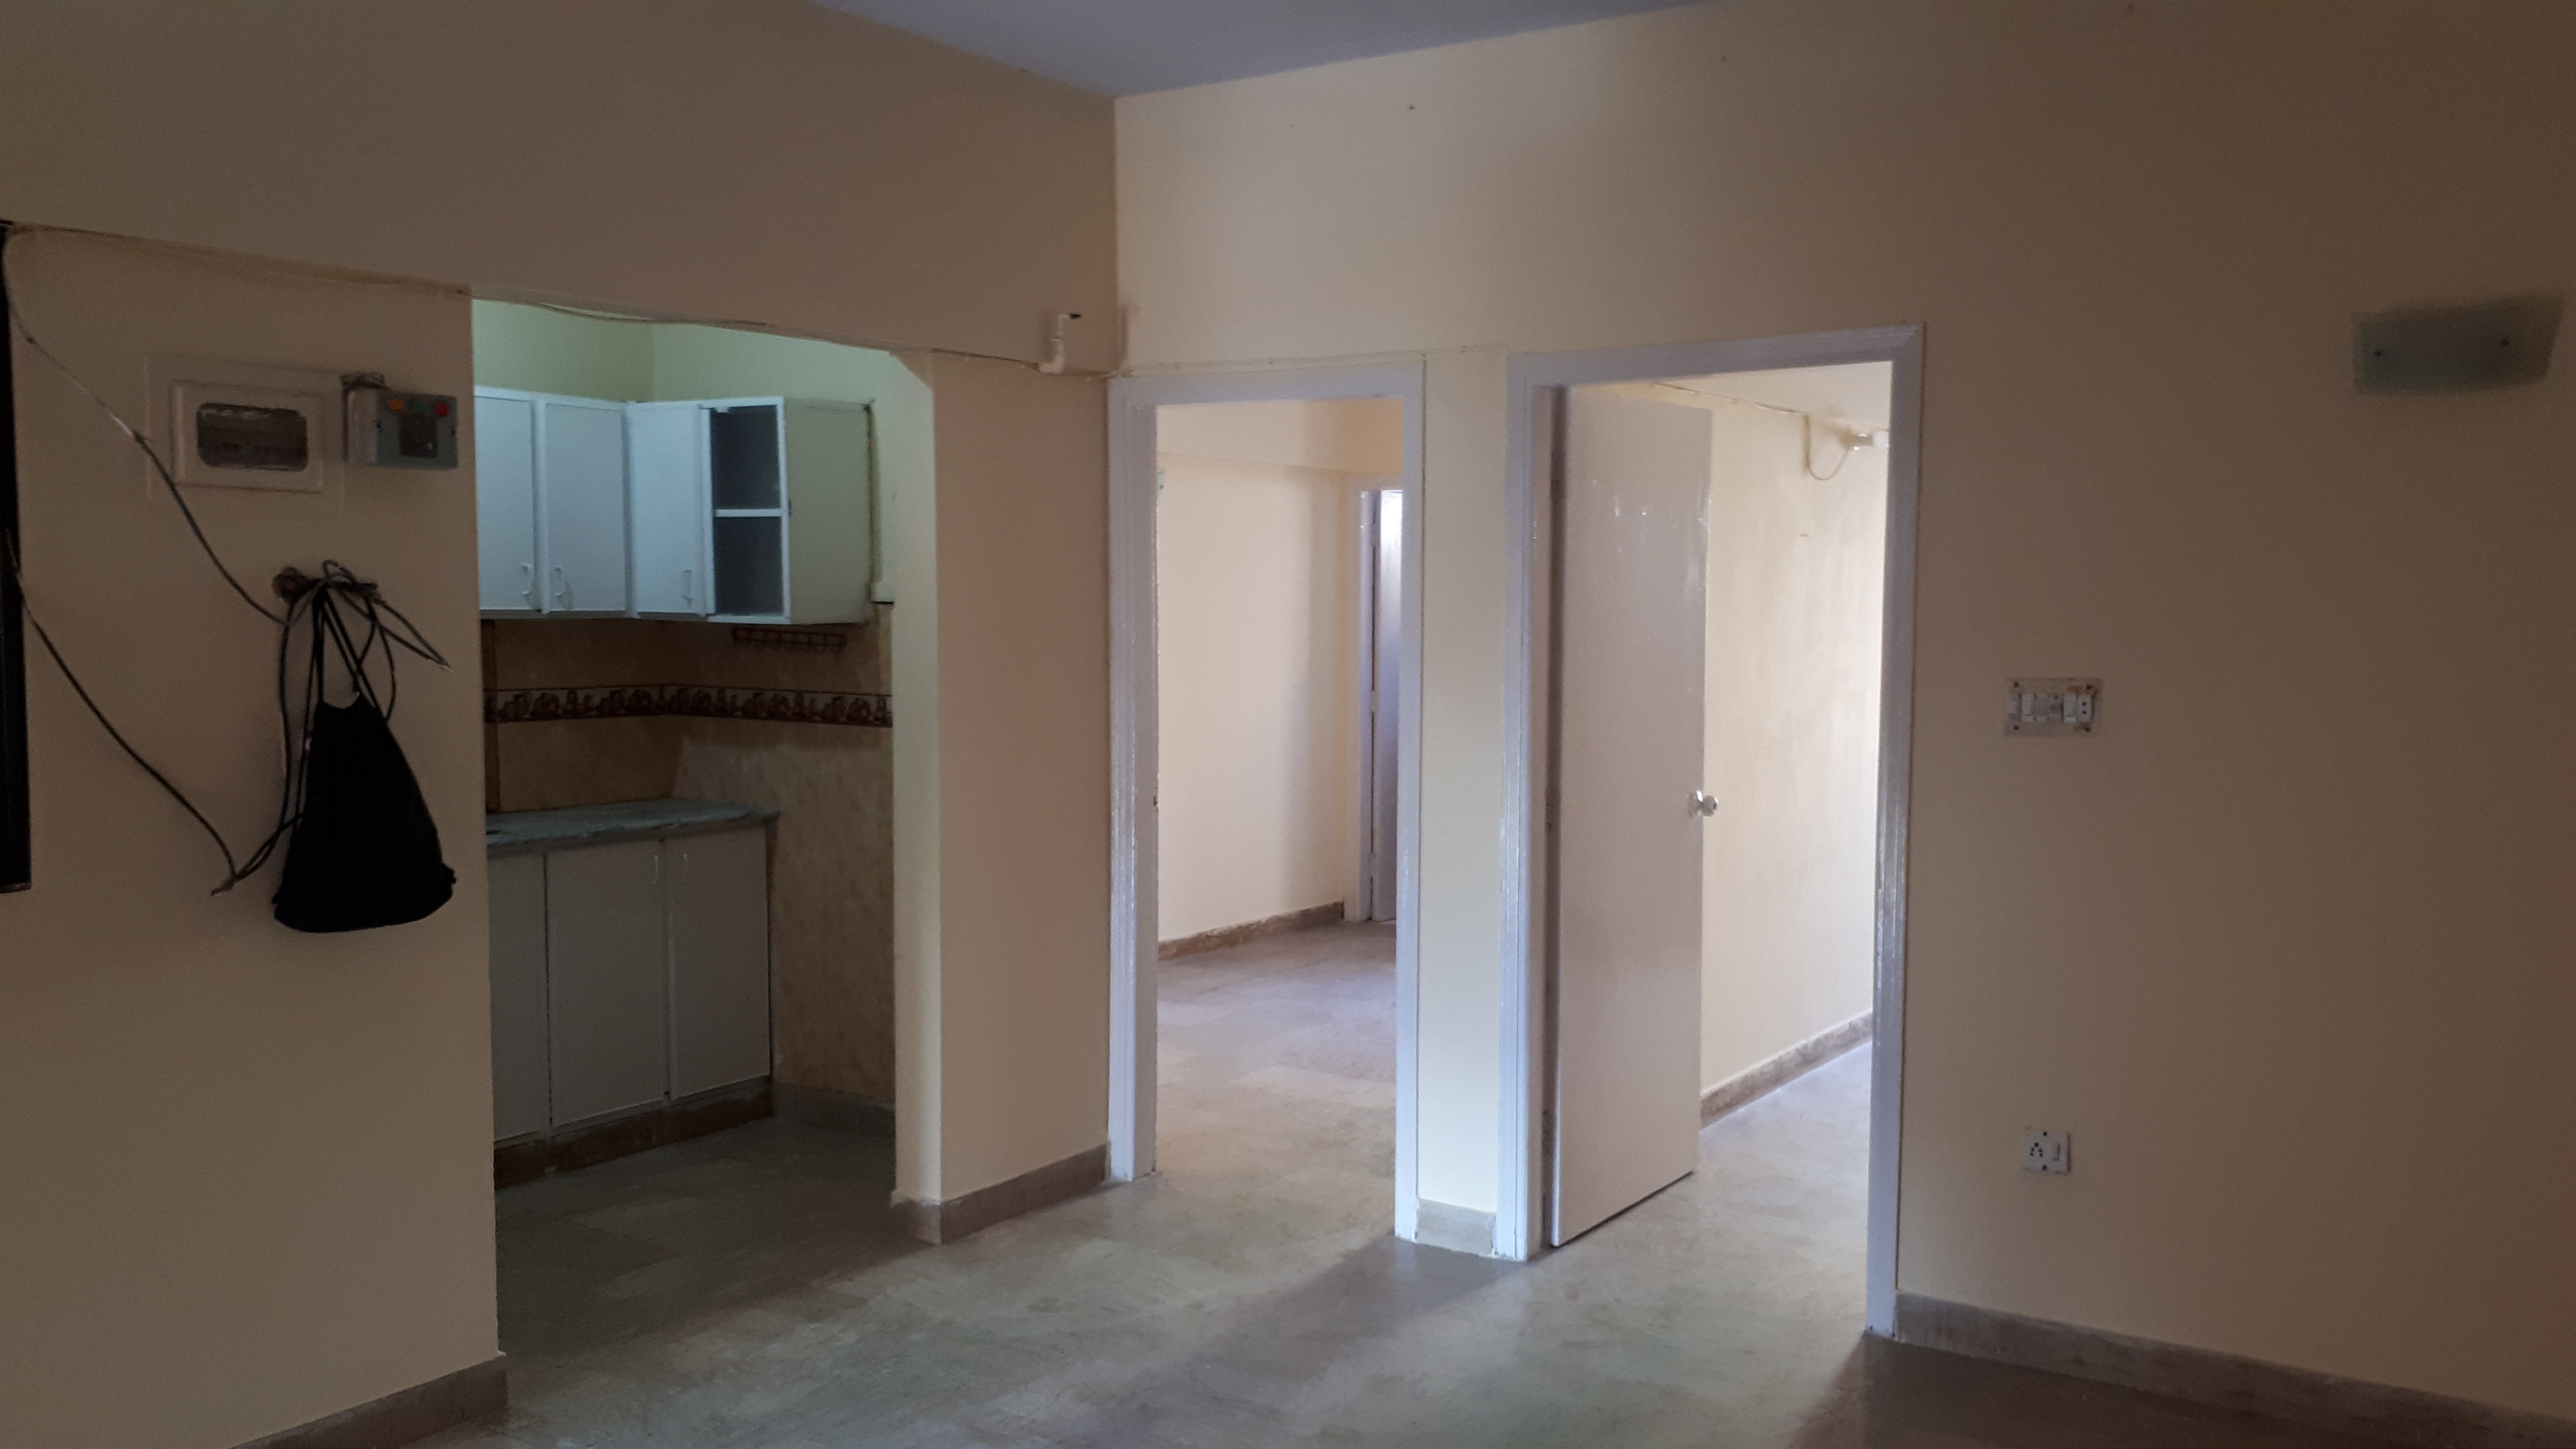 Defence phase 5 delton khadda market stadium lane 1 2 bed attach bathrooms kitchen lounge and parking in front of plot east open west open agents commission will be given 